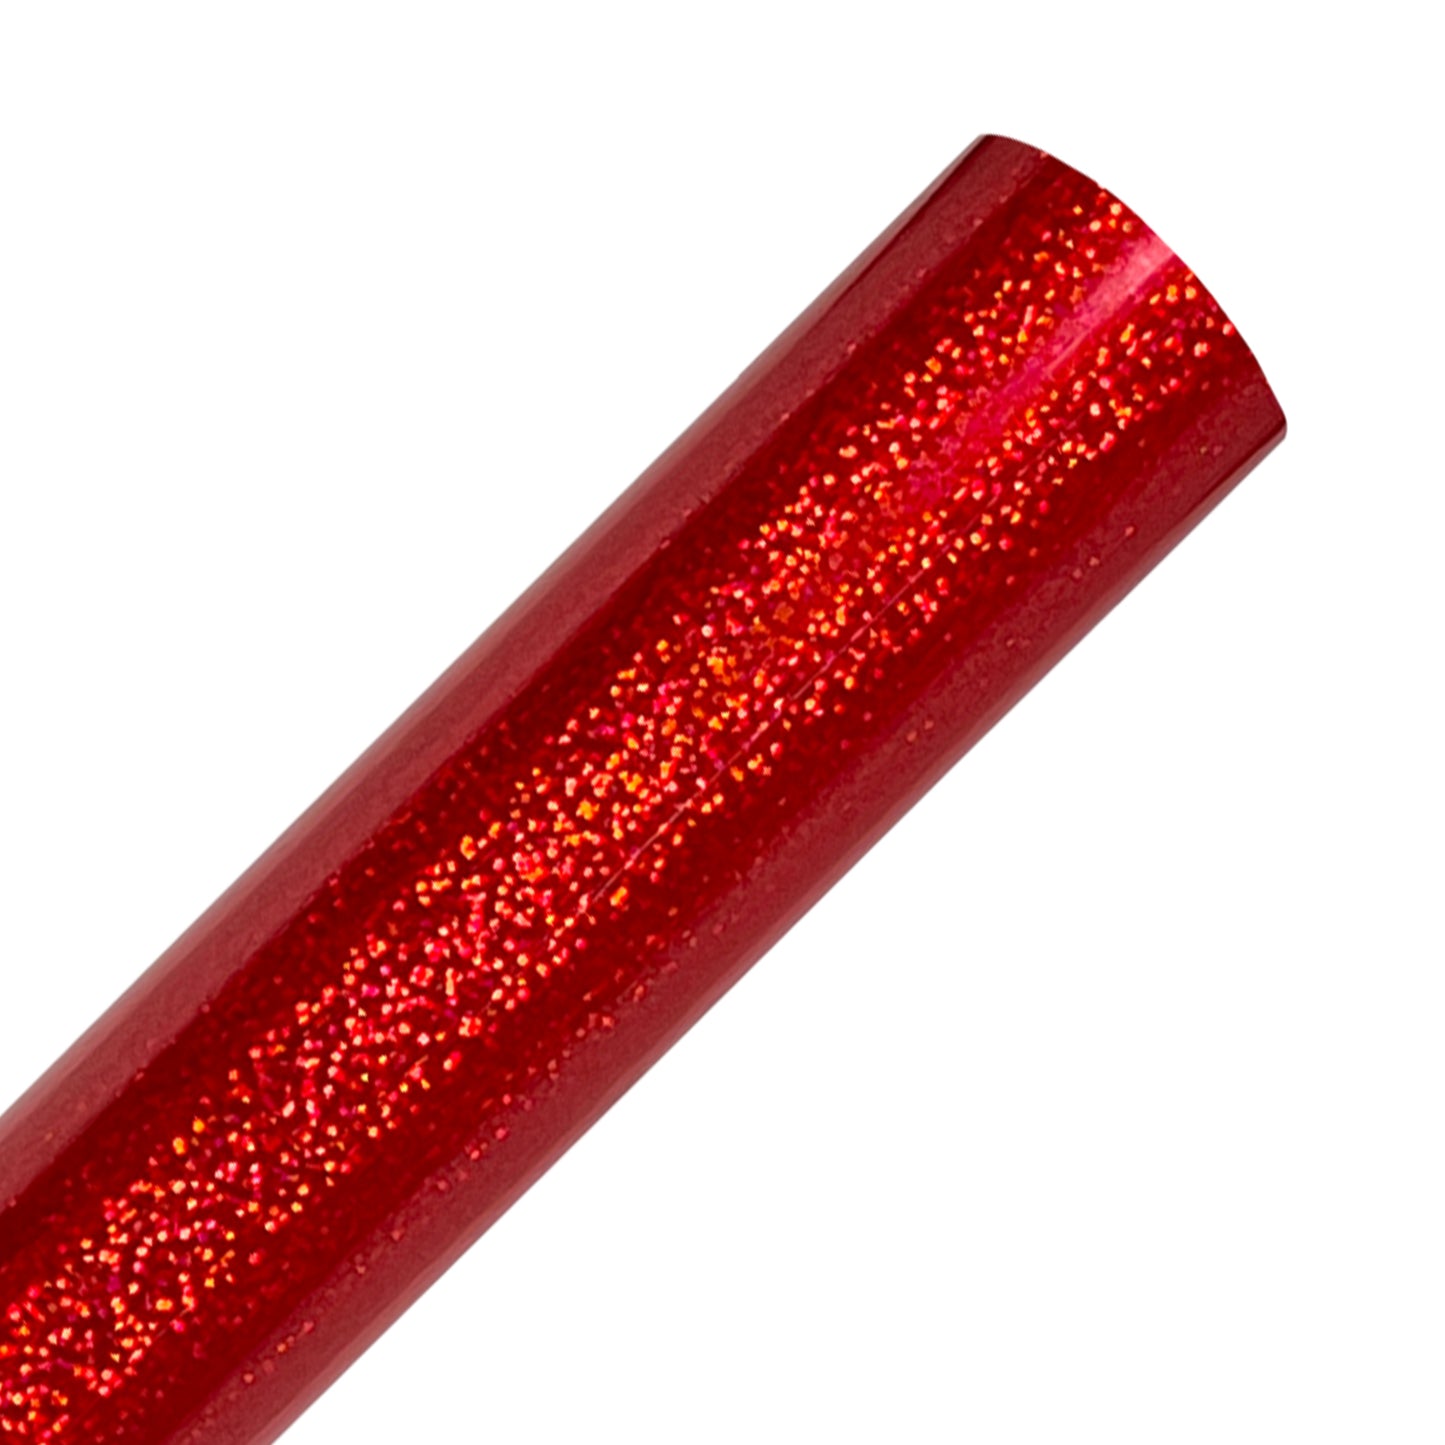 Red Holographic Sparkle Adhesive Vinyl Rolls By Craftables – shopcraftables